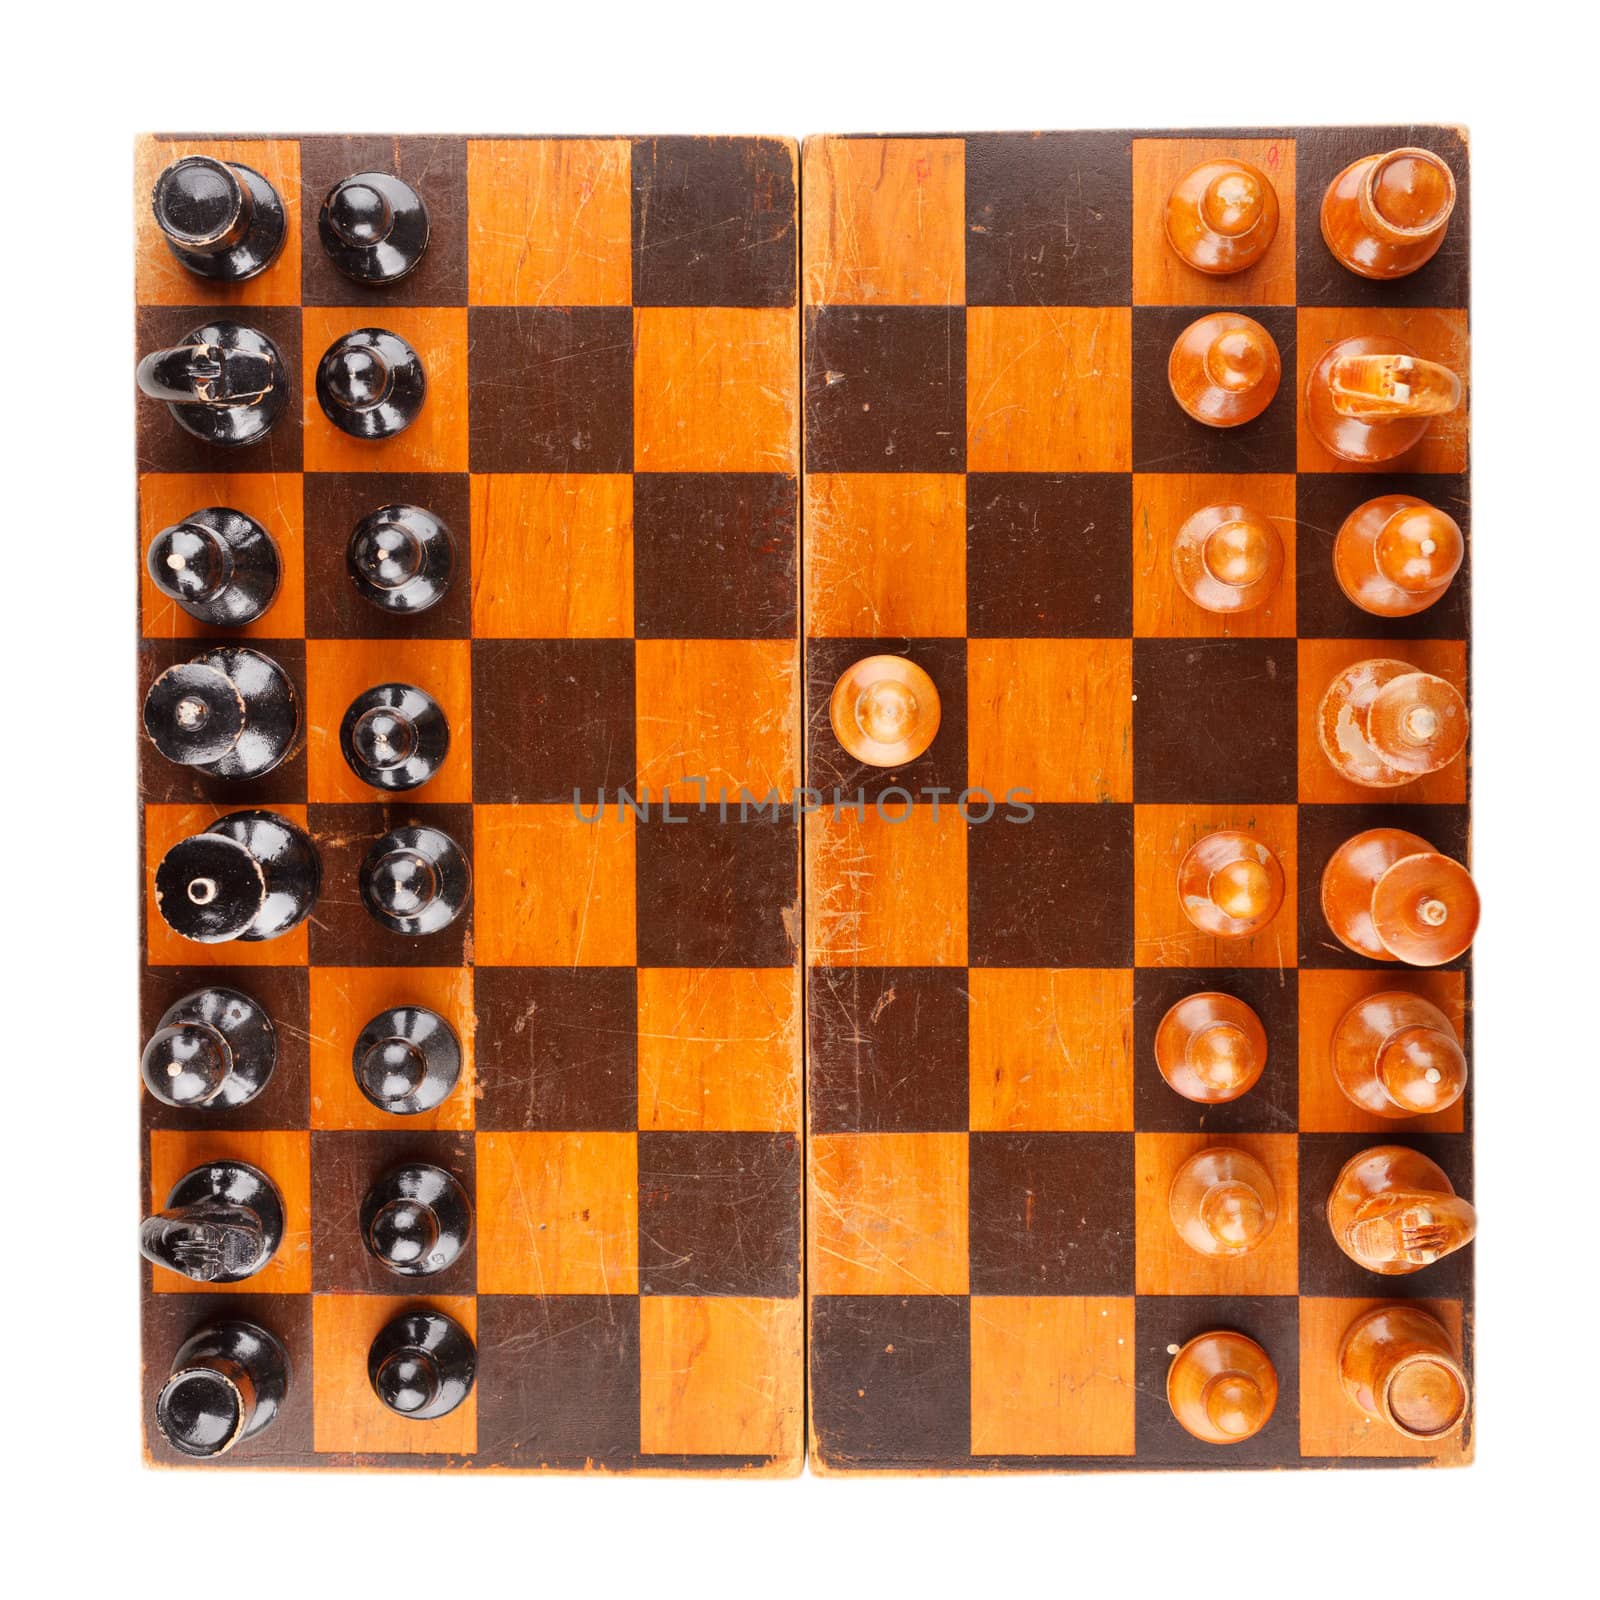 wooden chess by shebeko